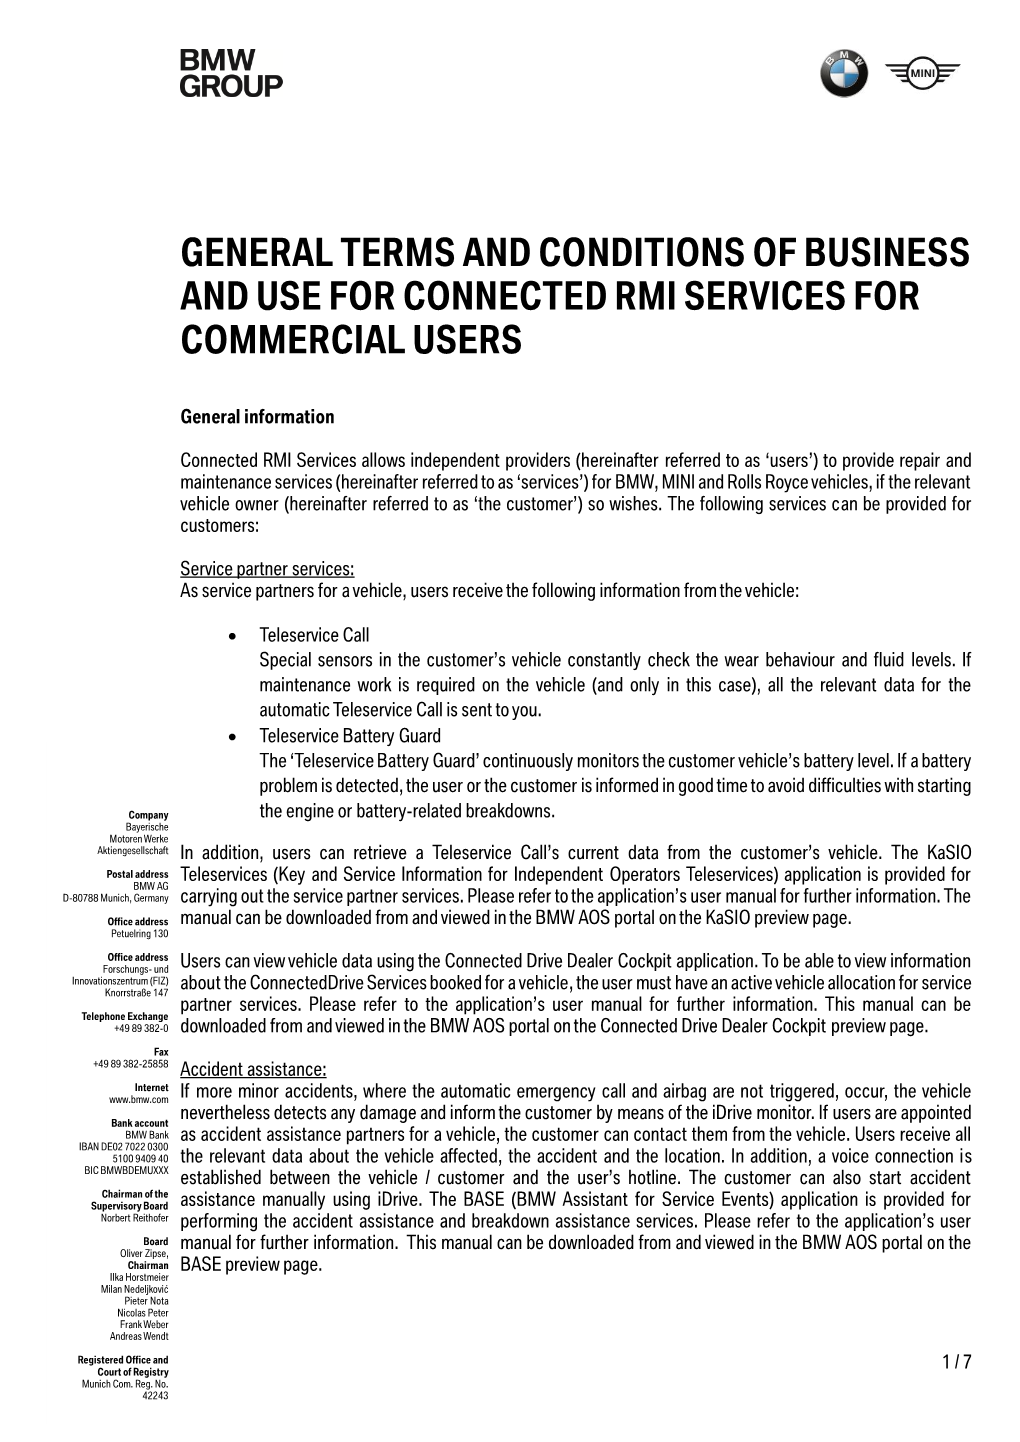 General Terms and Conditions of Business and Use for Connected Rmi Services for Commercial Users